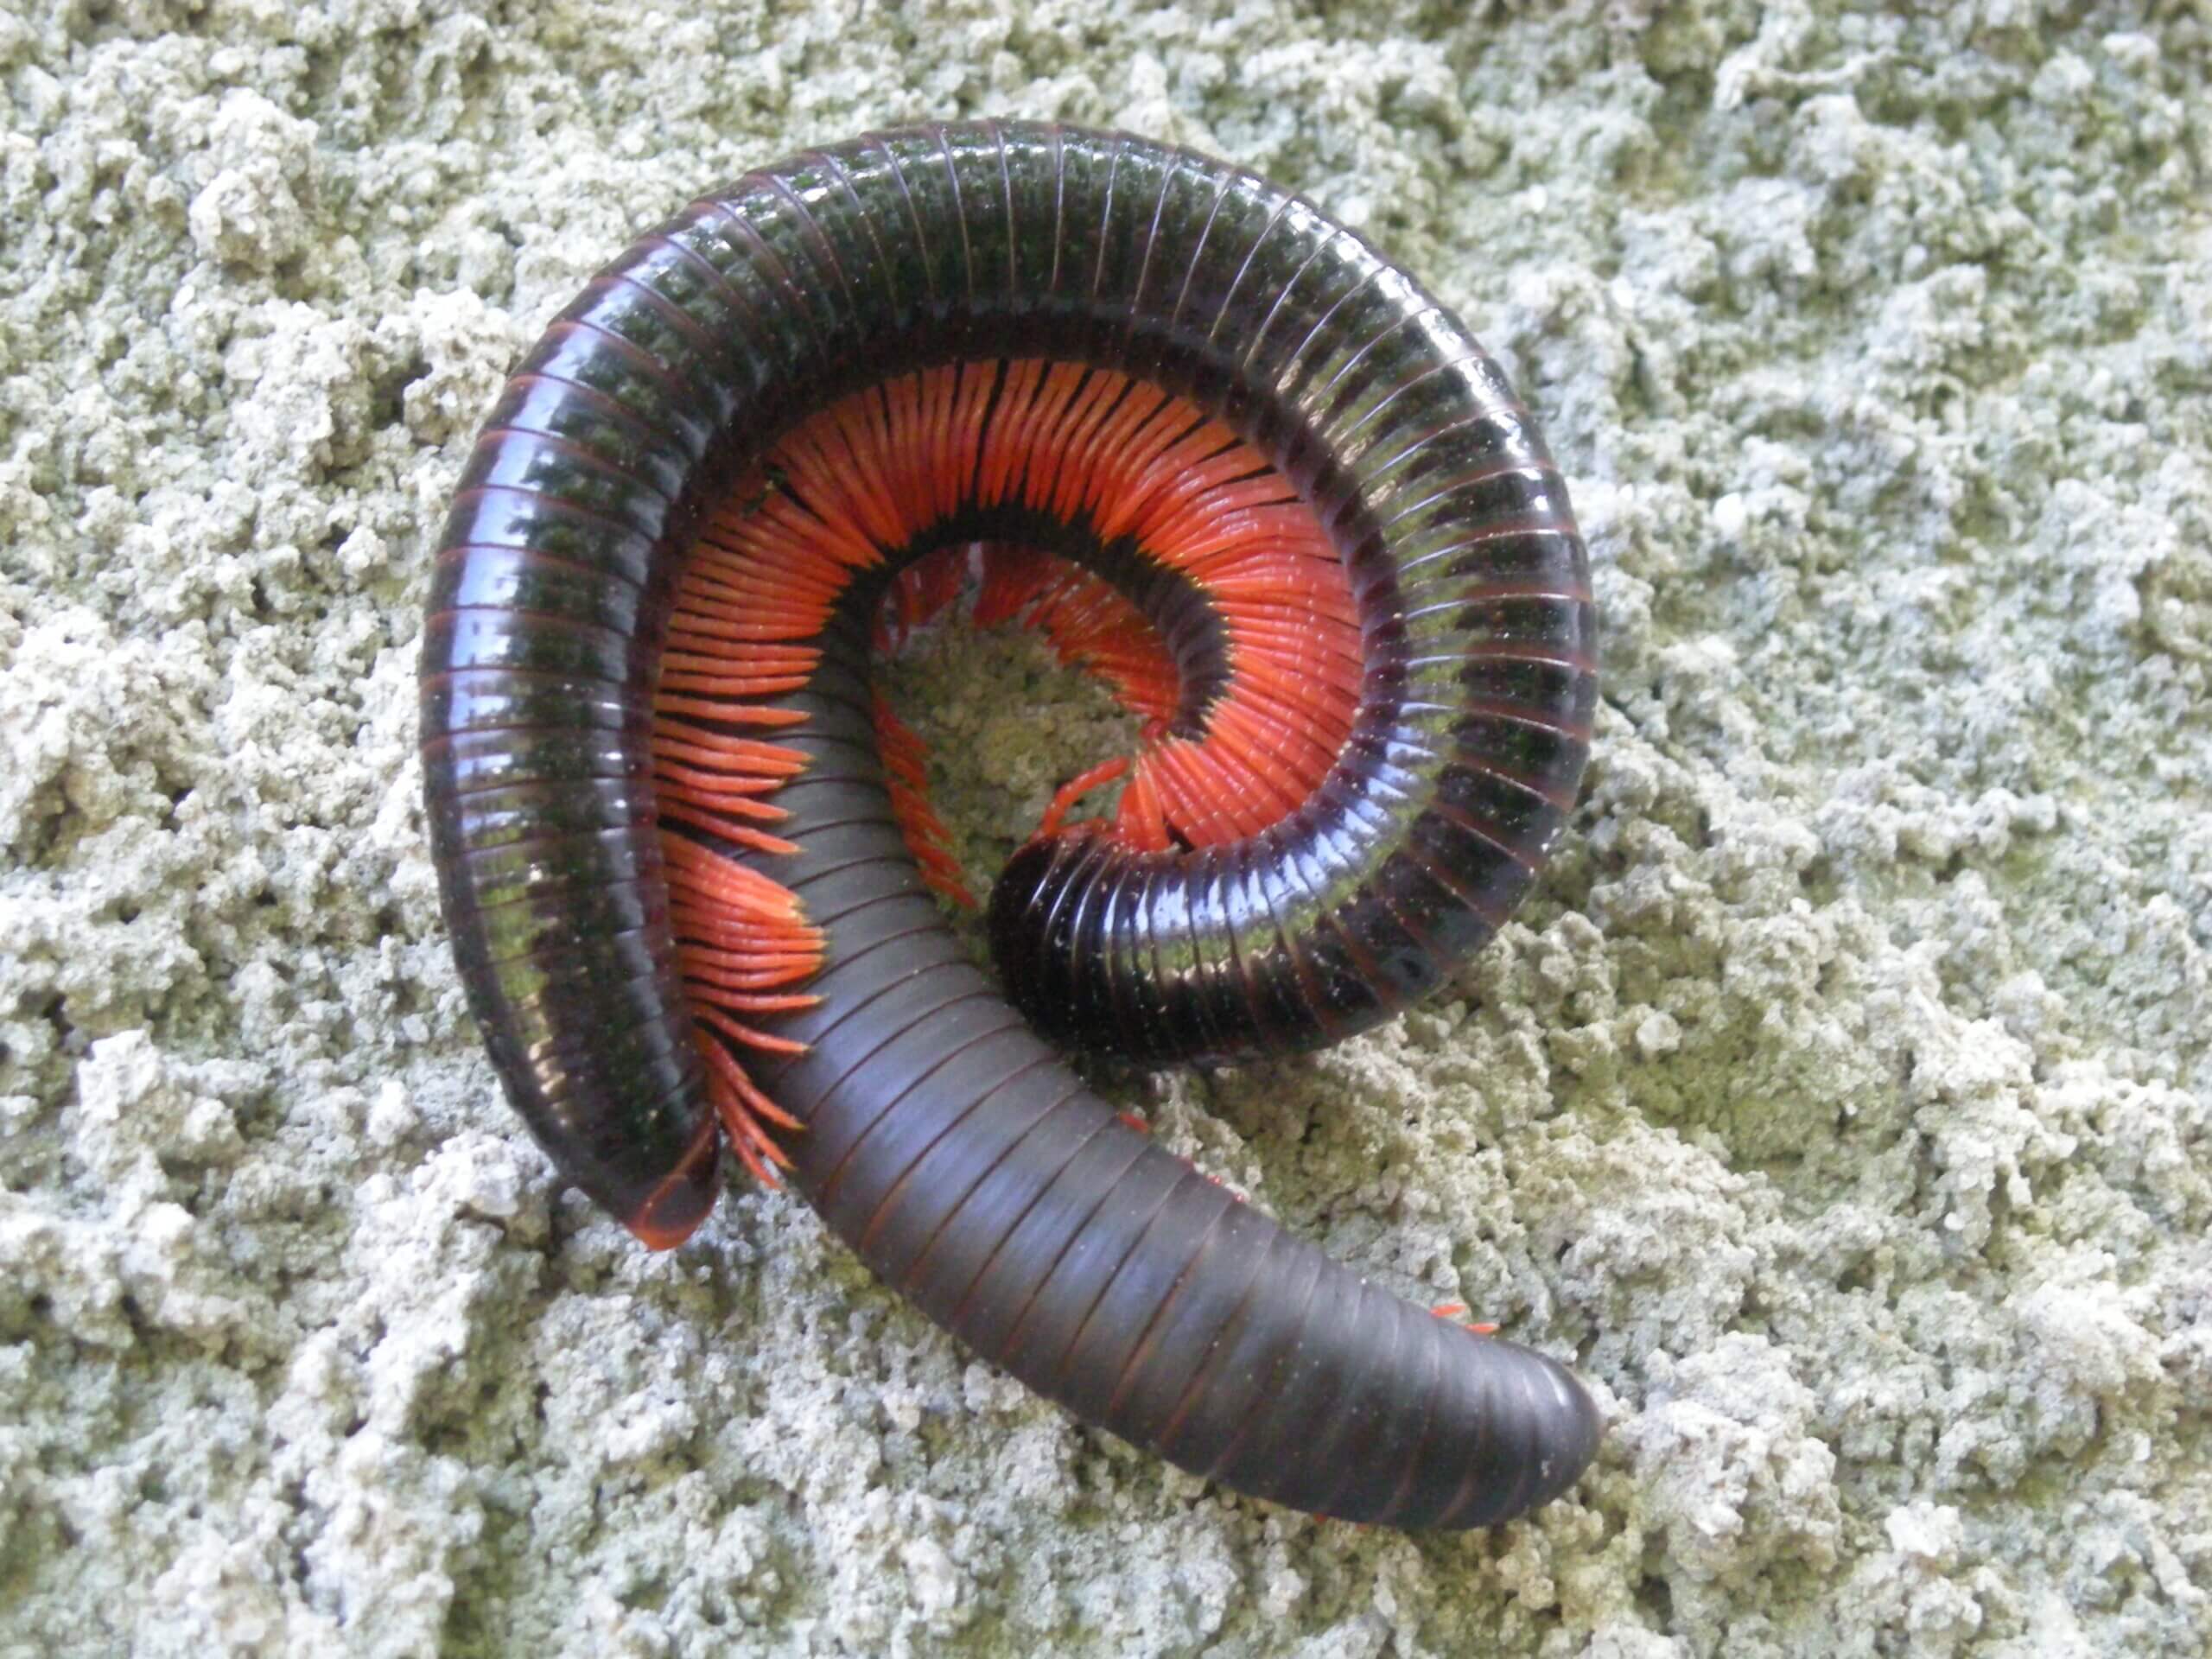 Giant African millipede.